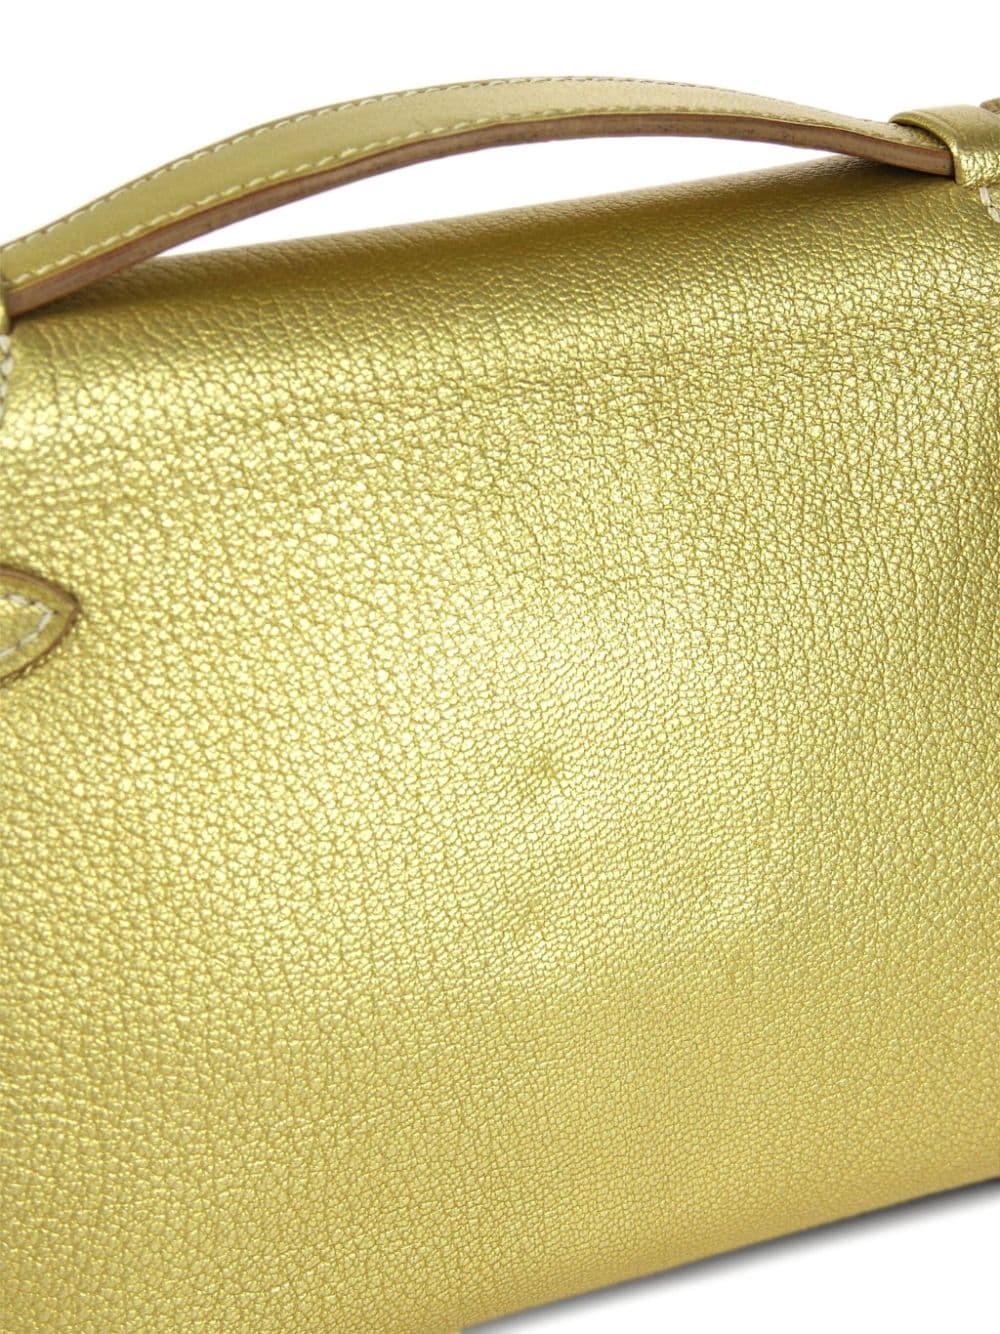 Pre-owned Hermes 2005  Kelly Cut Clutch In Gold